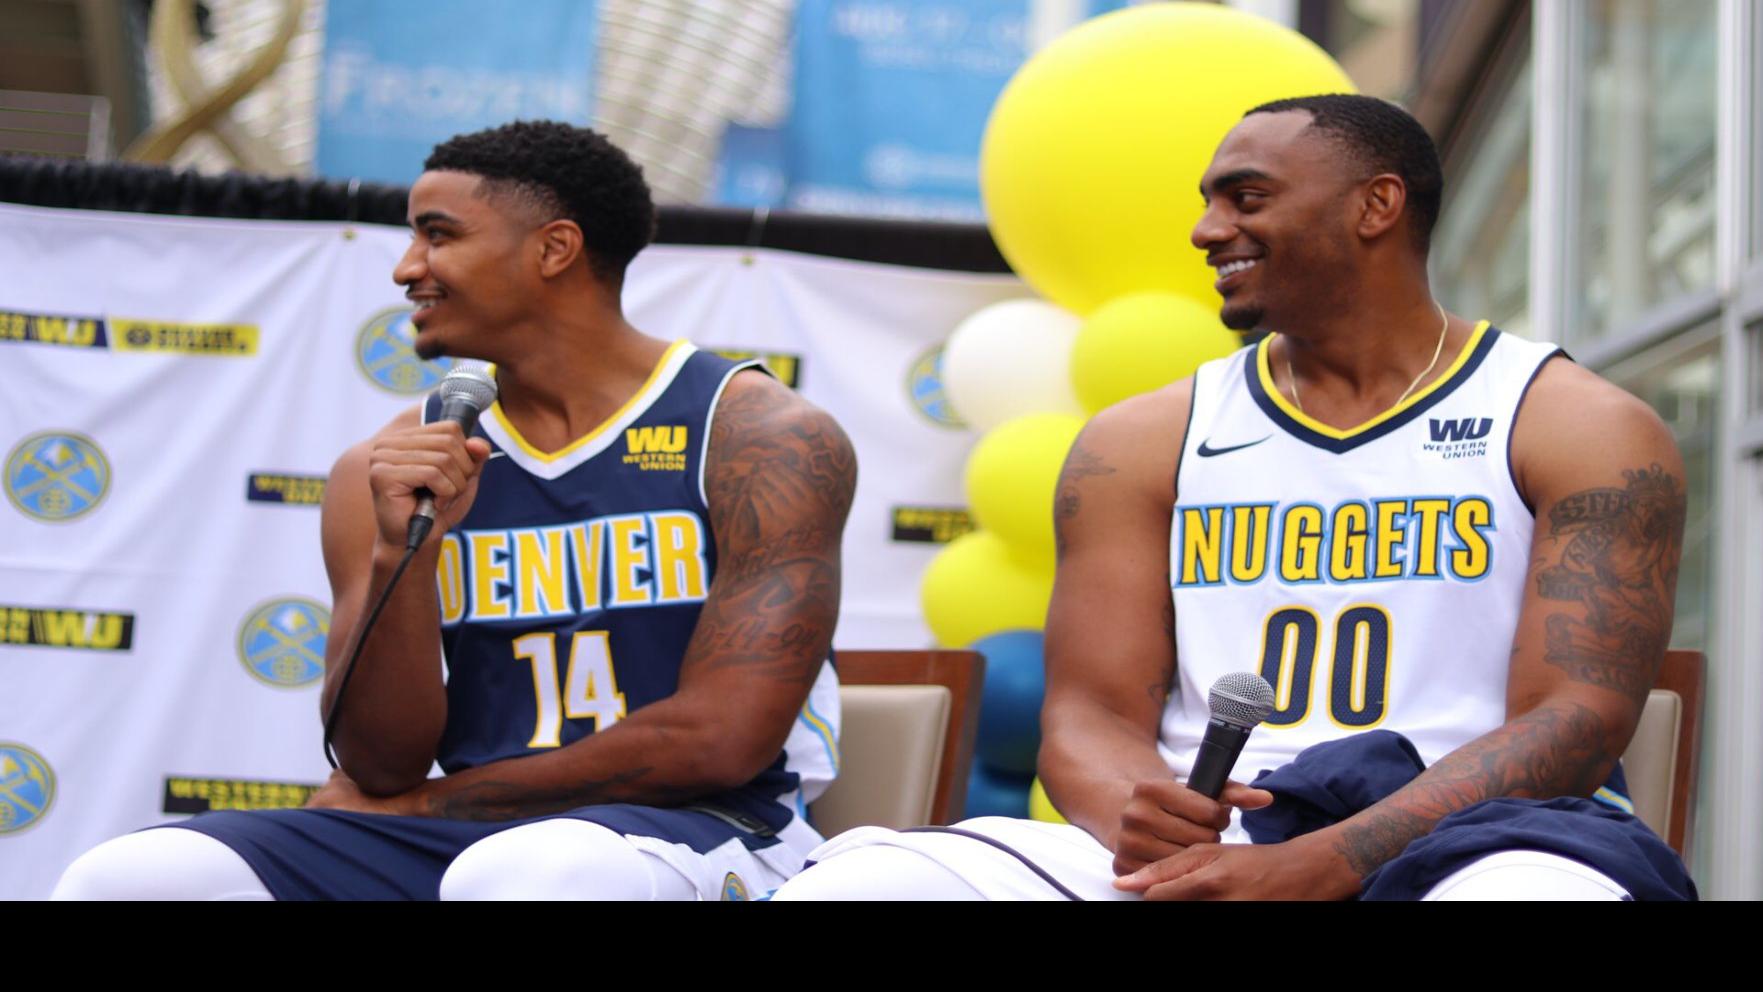 What is Western Union on the Denver Nuggets jerseys?